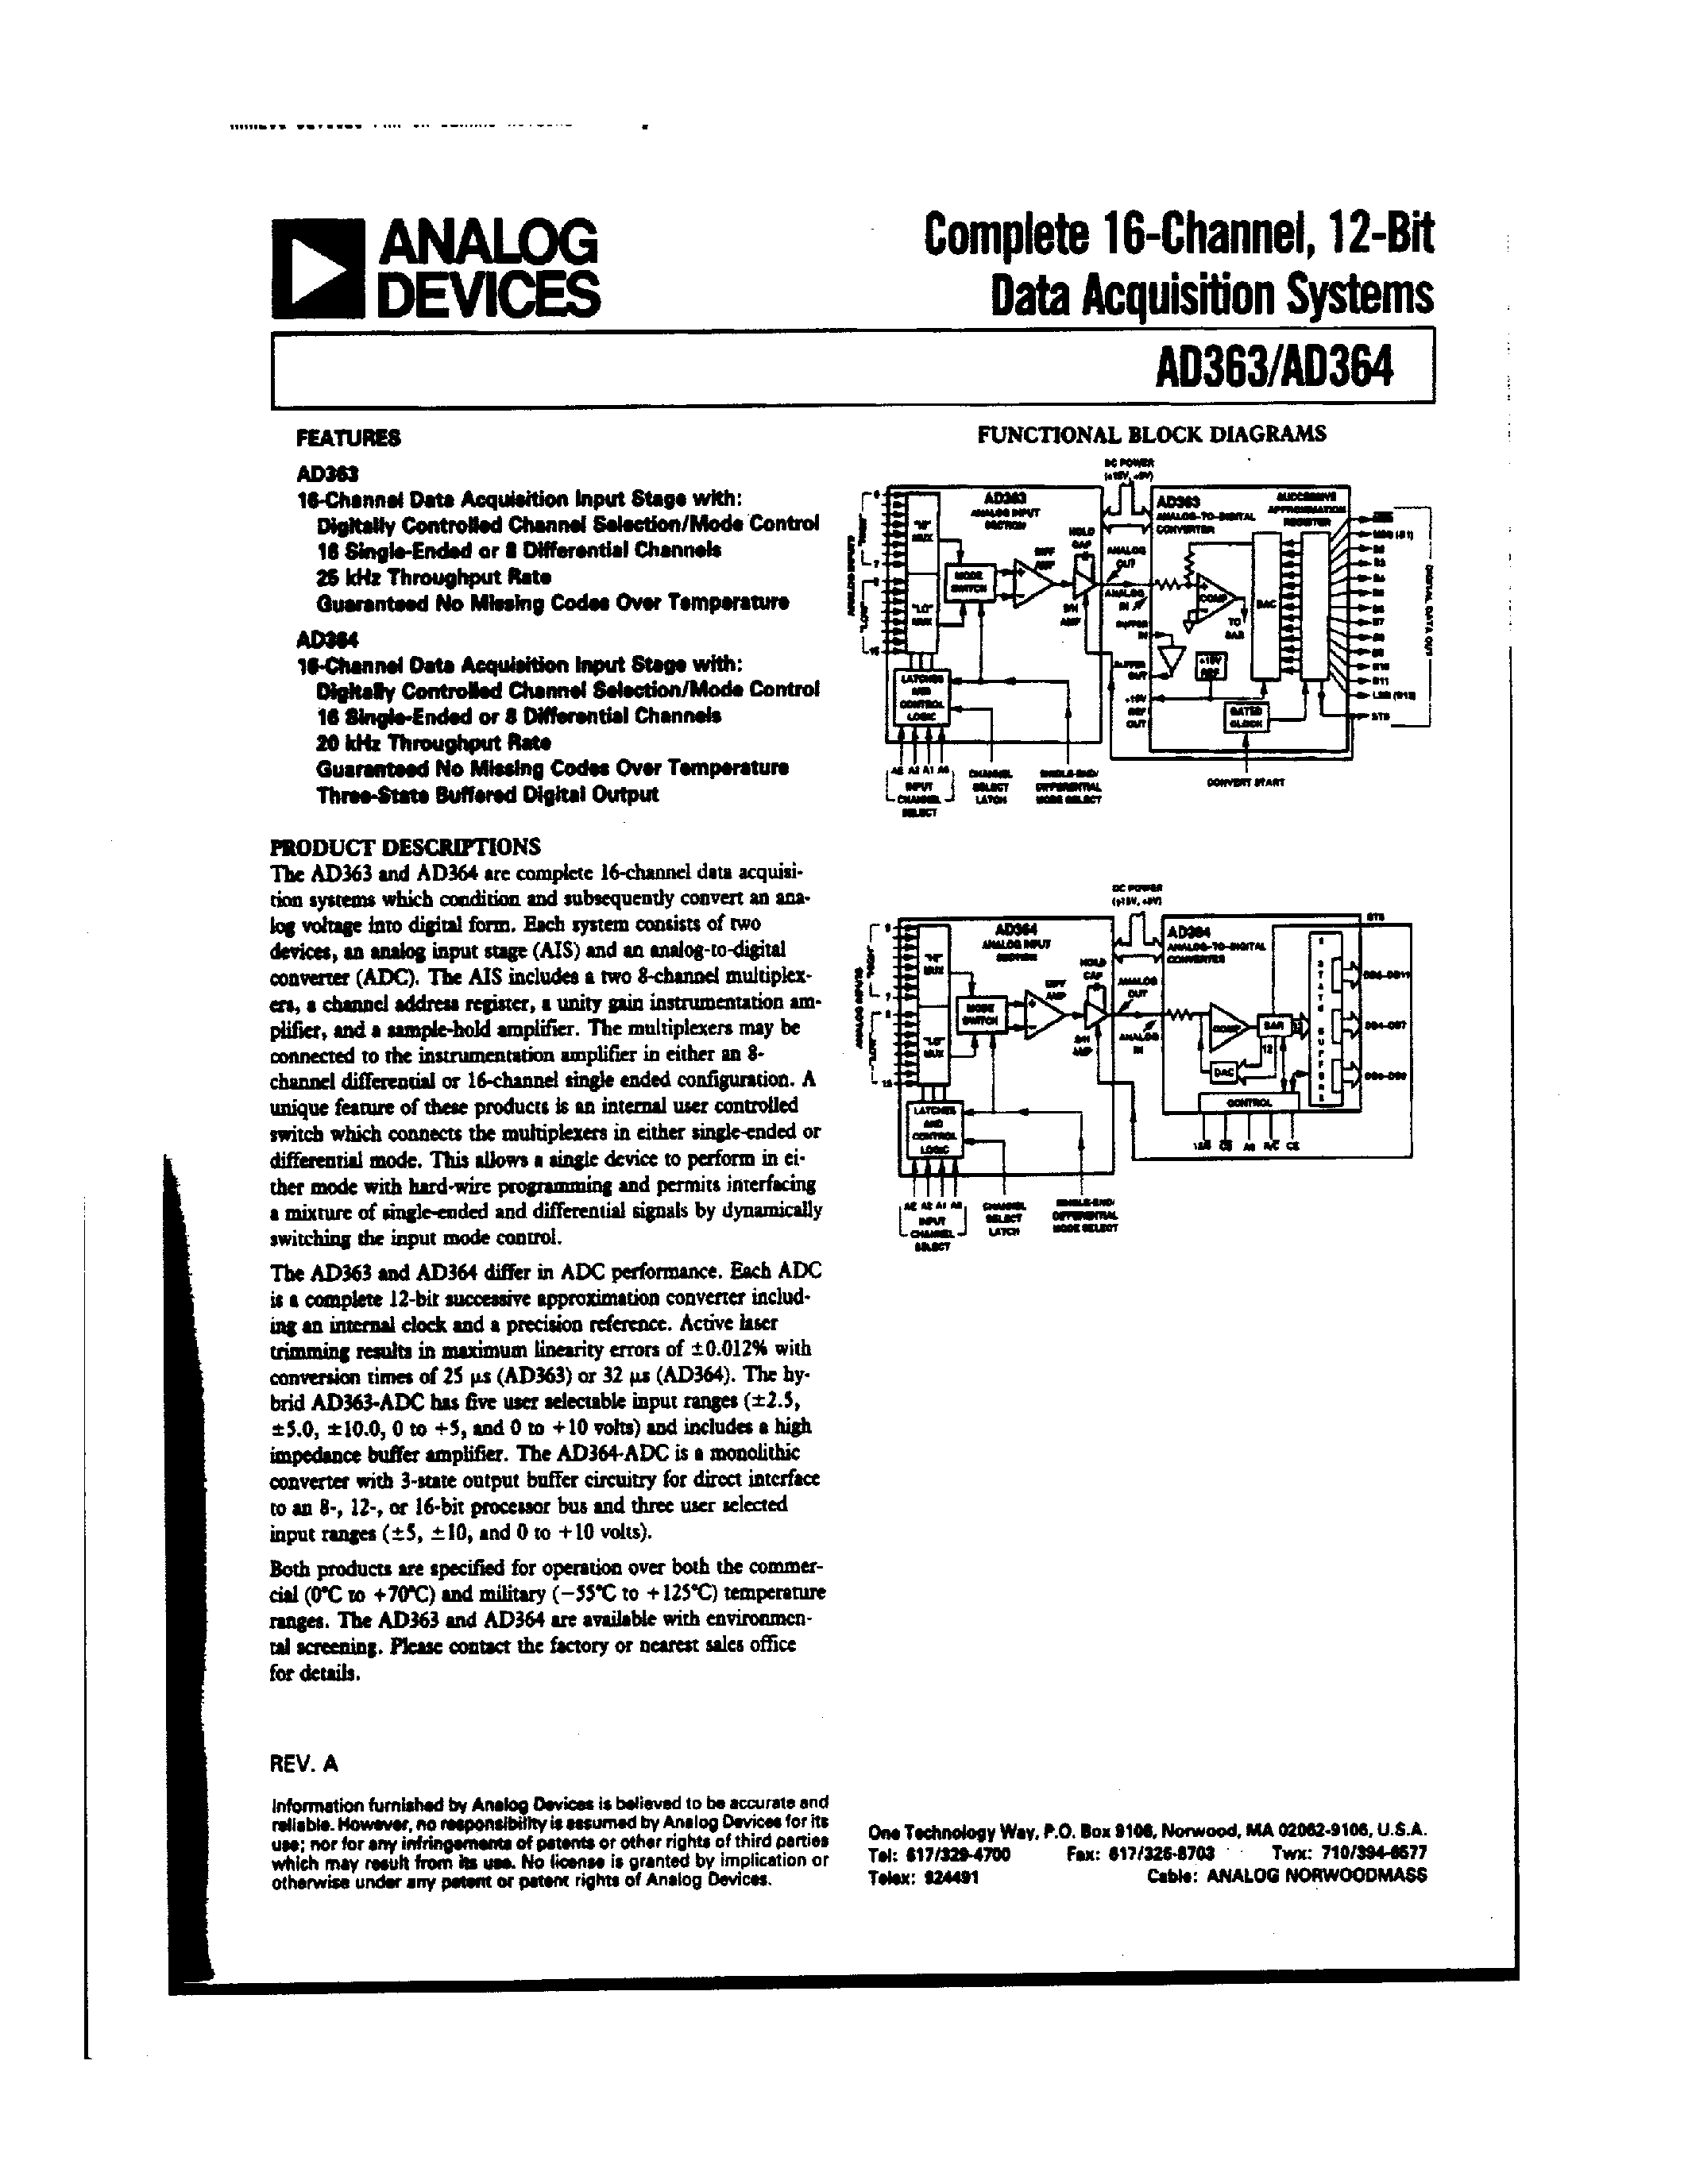 Datasheet AD364RTD - Complete 16-Channel/12-Bit Data Acquisition System page 1